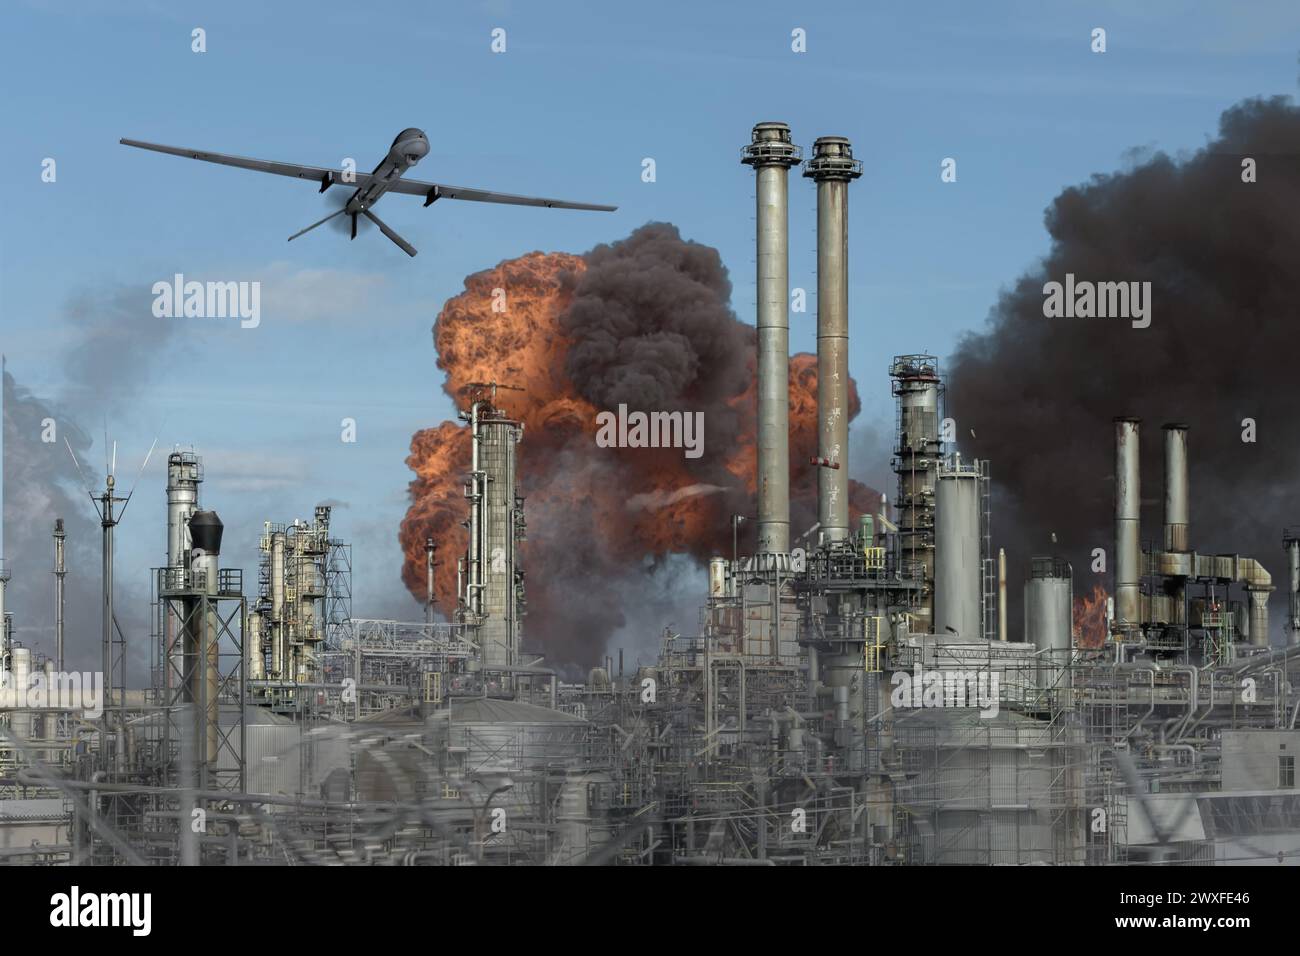 Drone flying over oil depot, oil tank burning and smoking, refinery fire, drone attack. Stock Photo